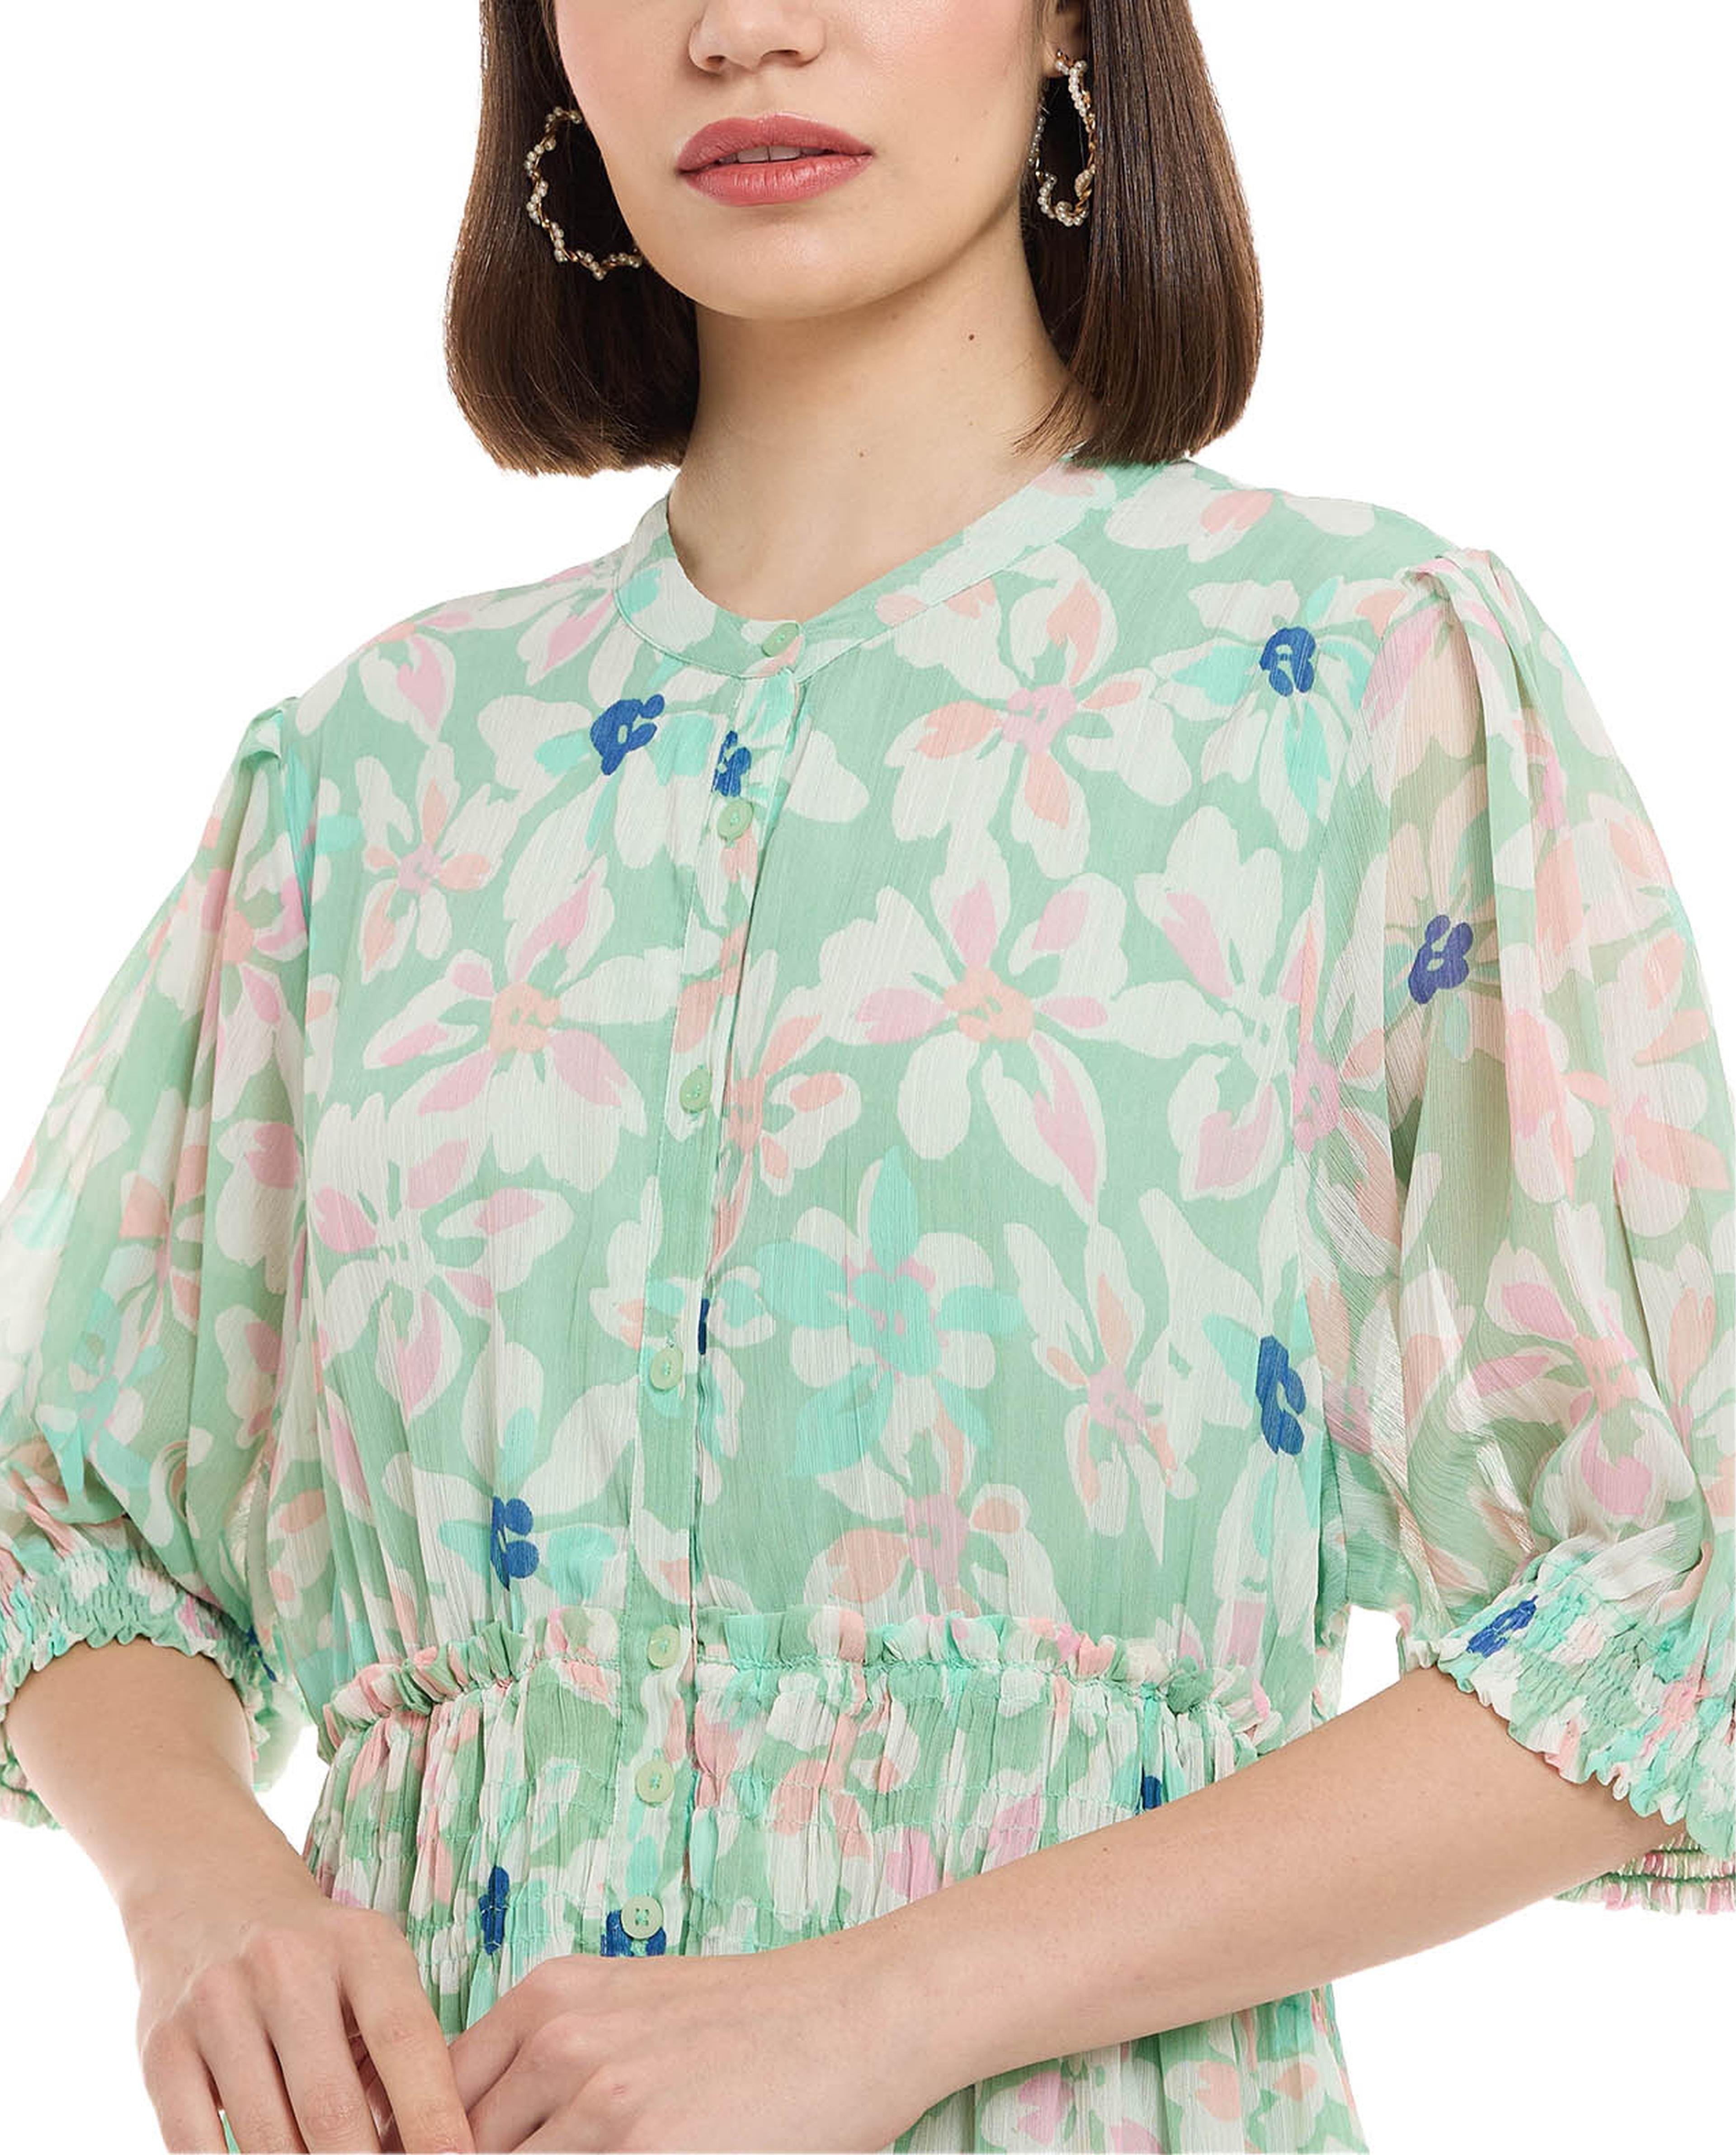 Floral Print Midi Dress with Stand Collar and Puff Sleeves